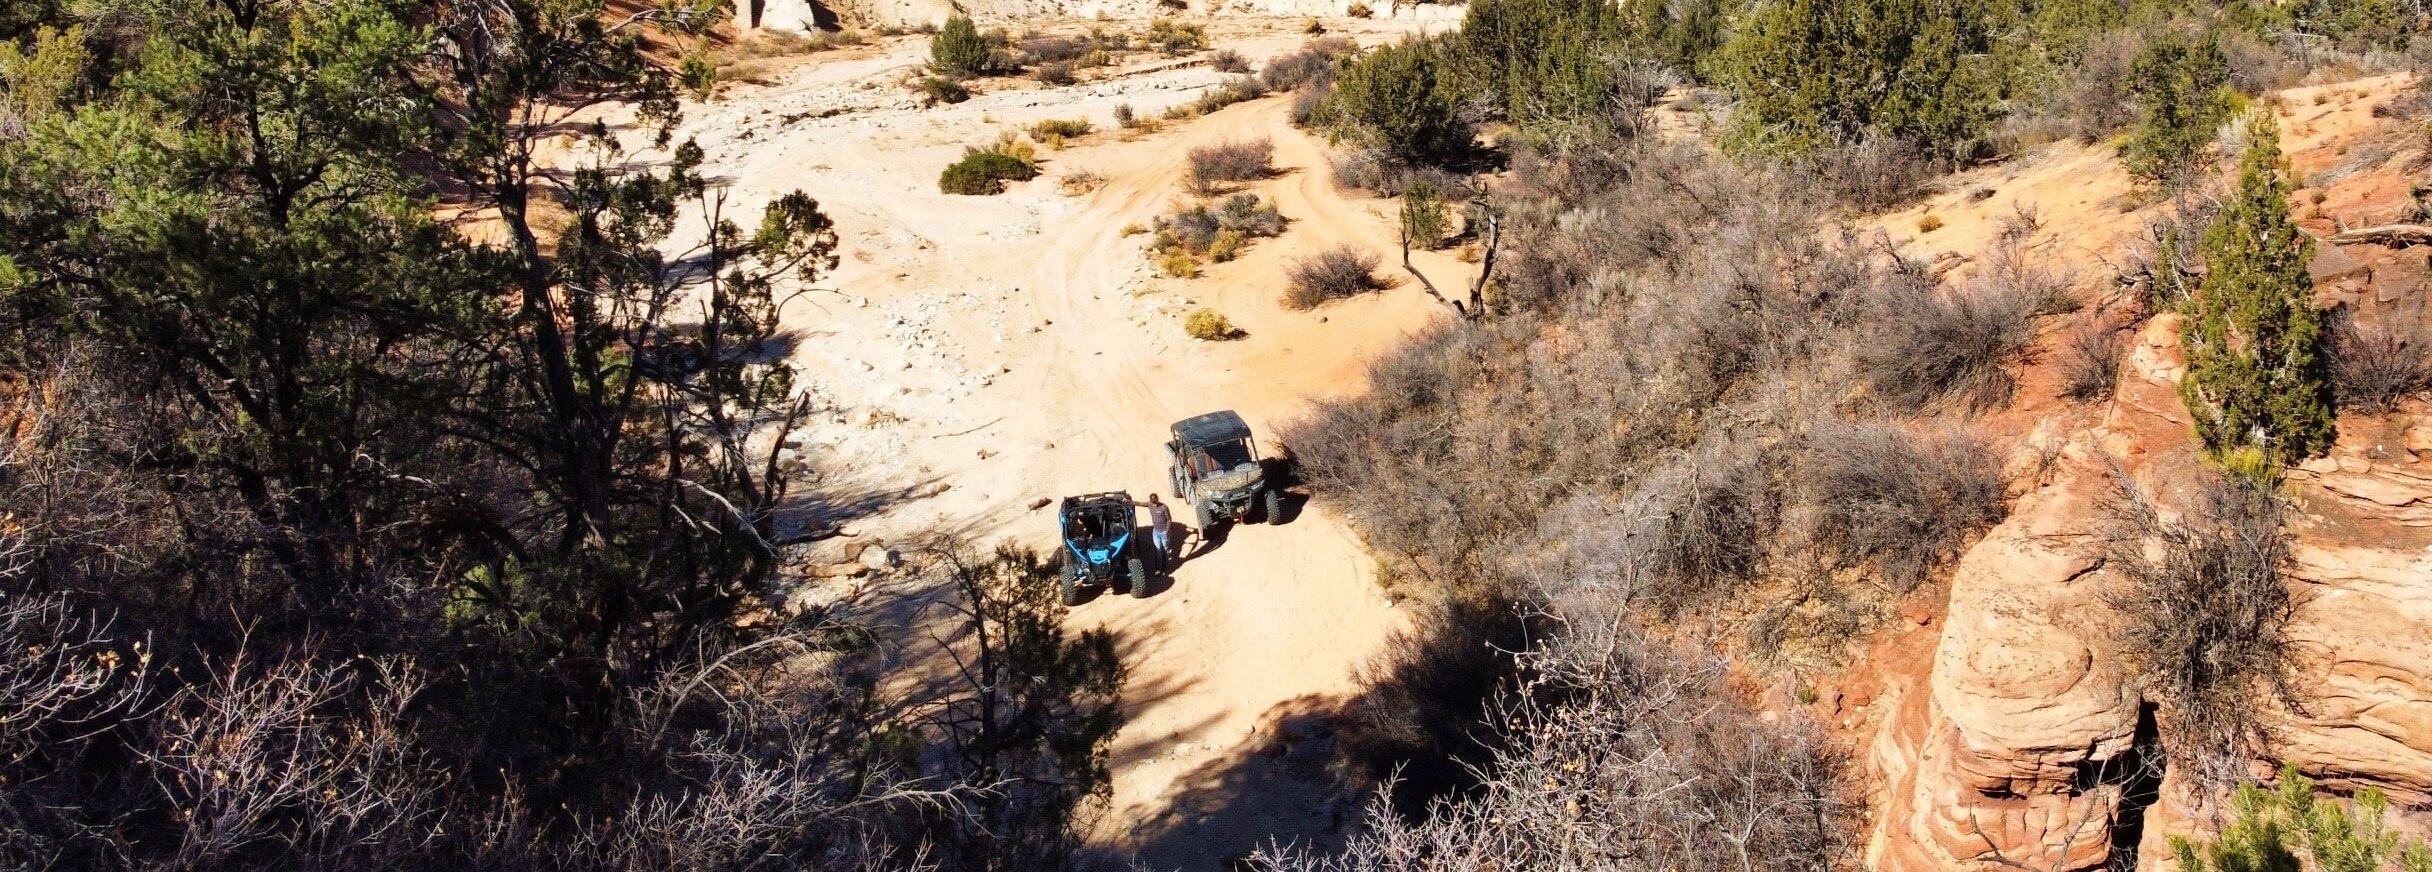 Two Can-Am units riding in a canyon